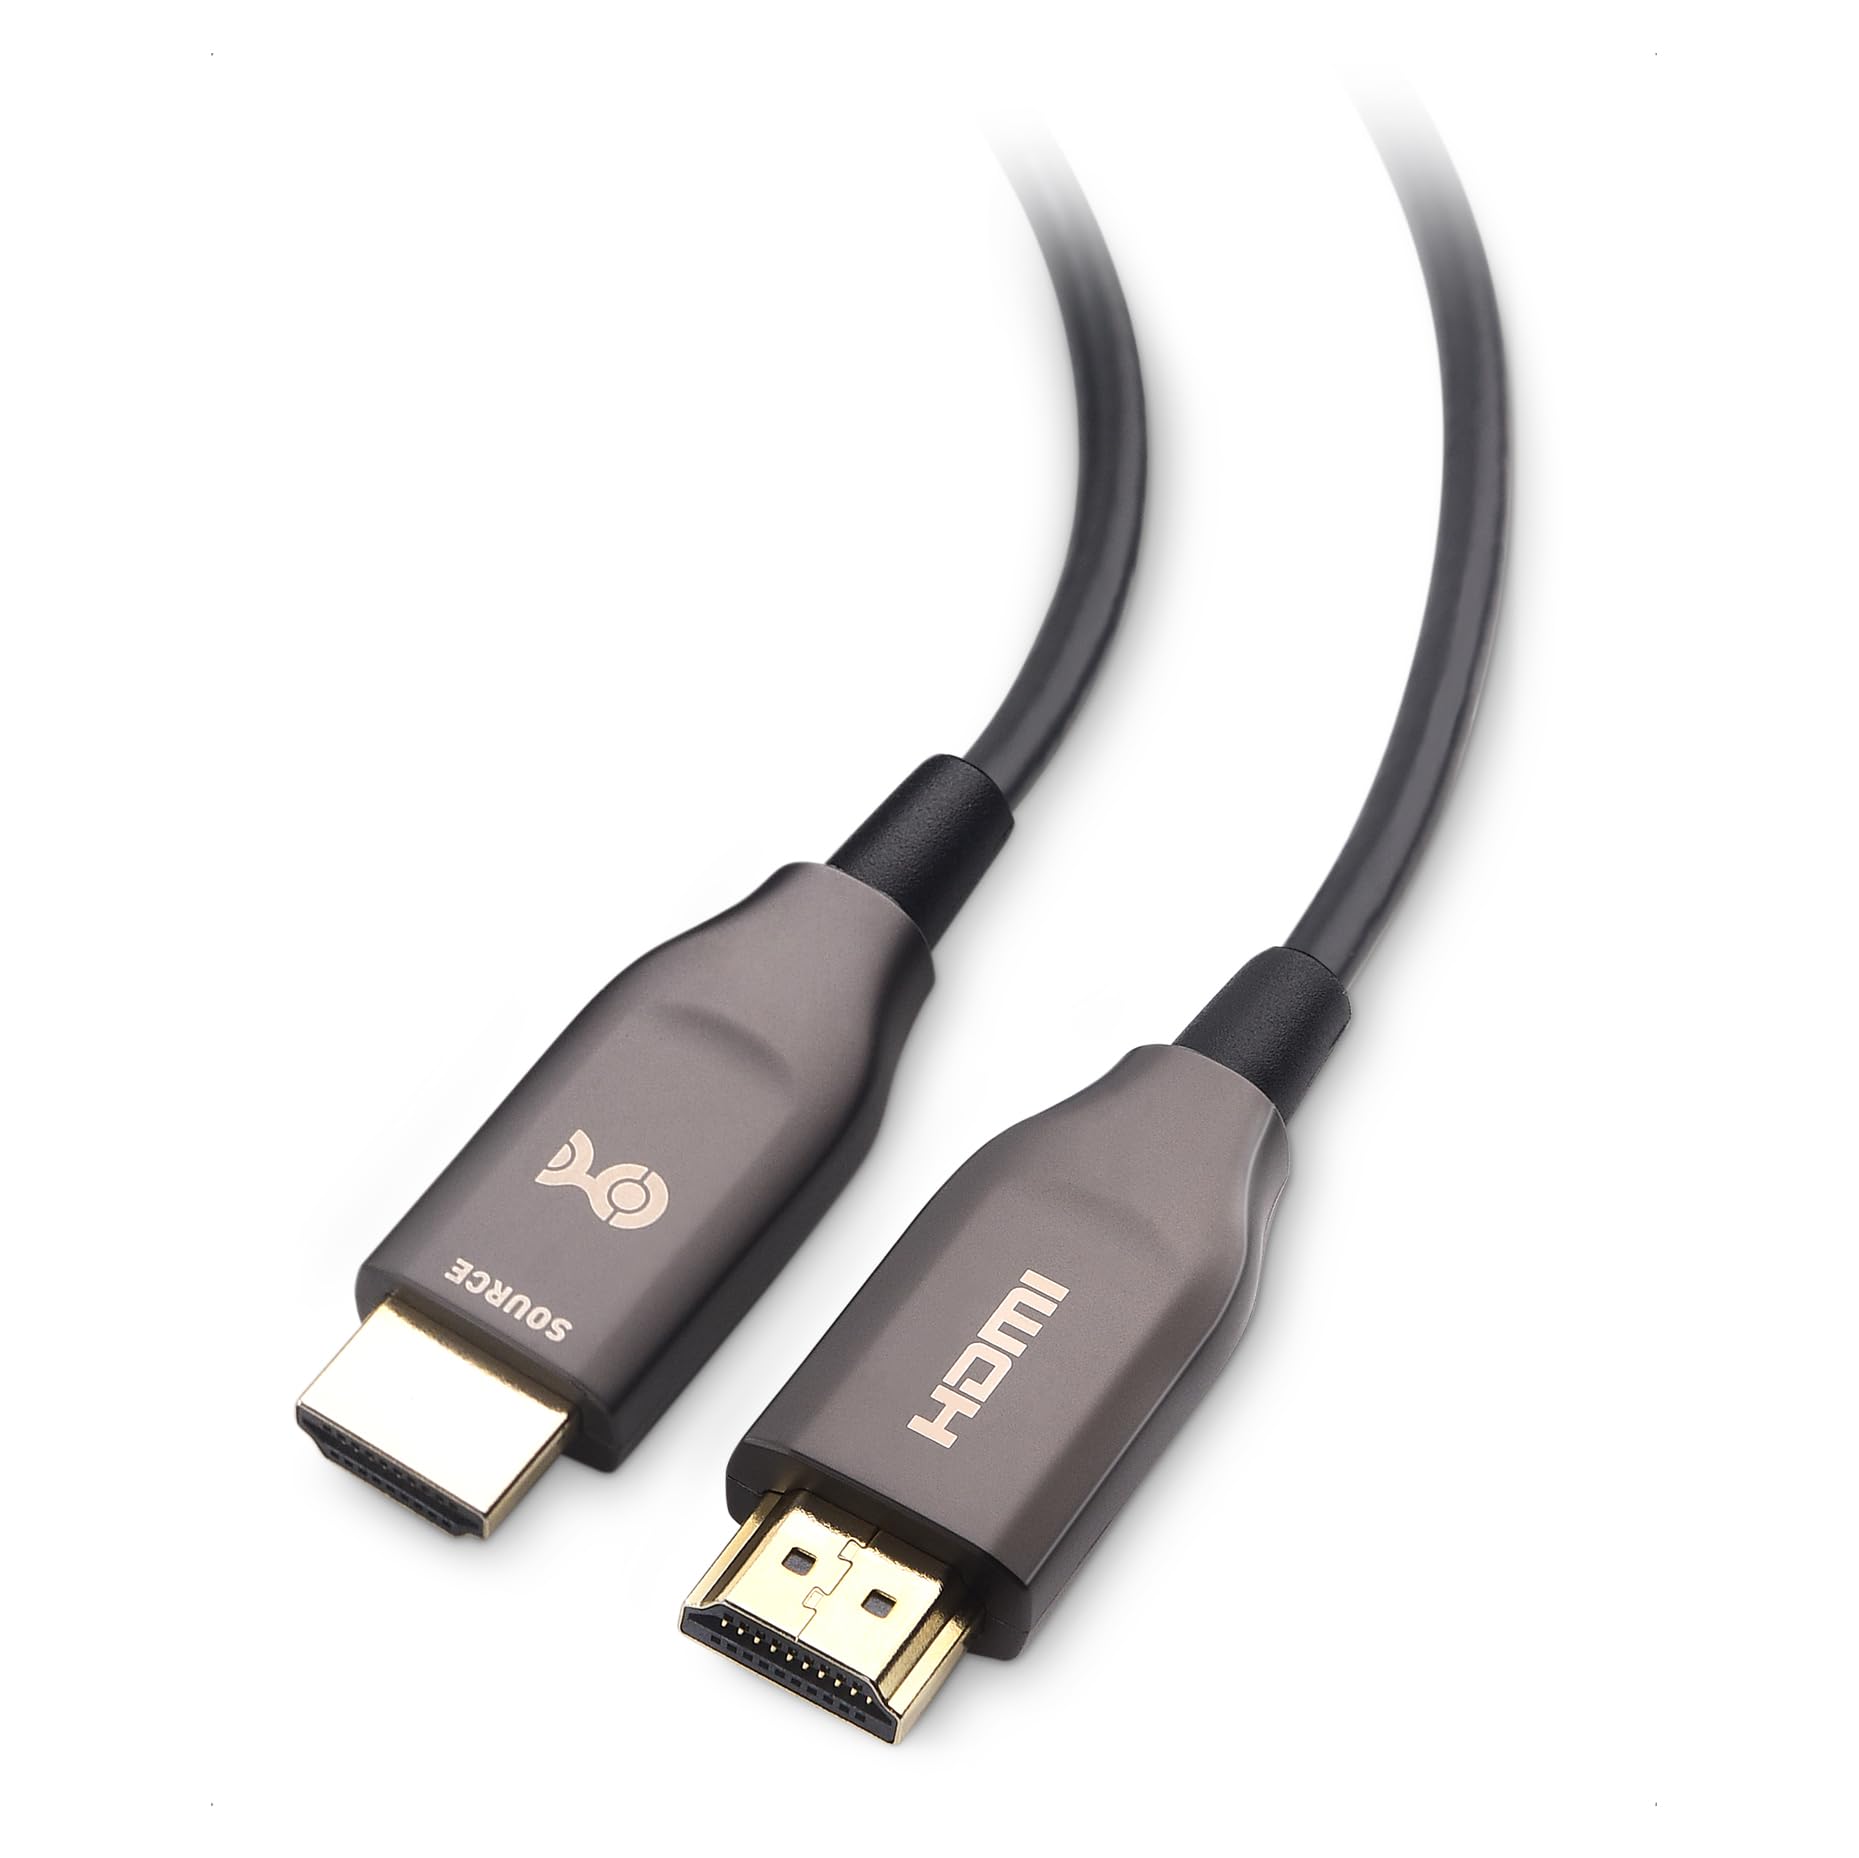 Higher cost compared to traditional HDMI cables
Potential for latency issues